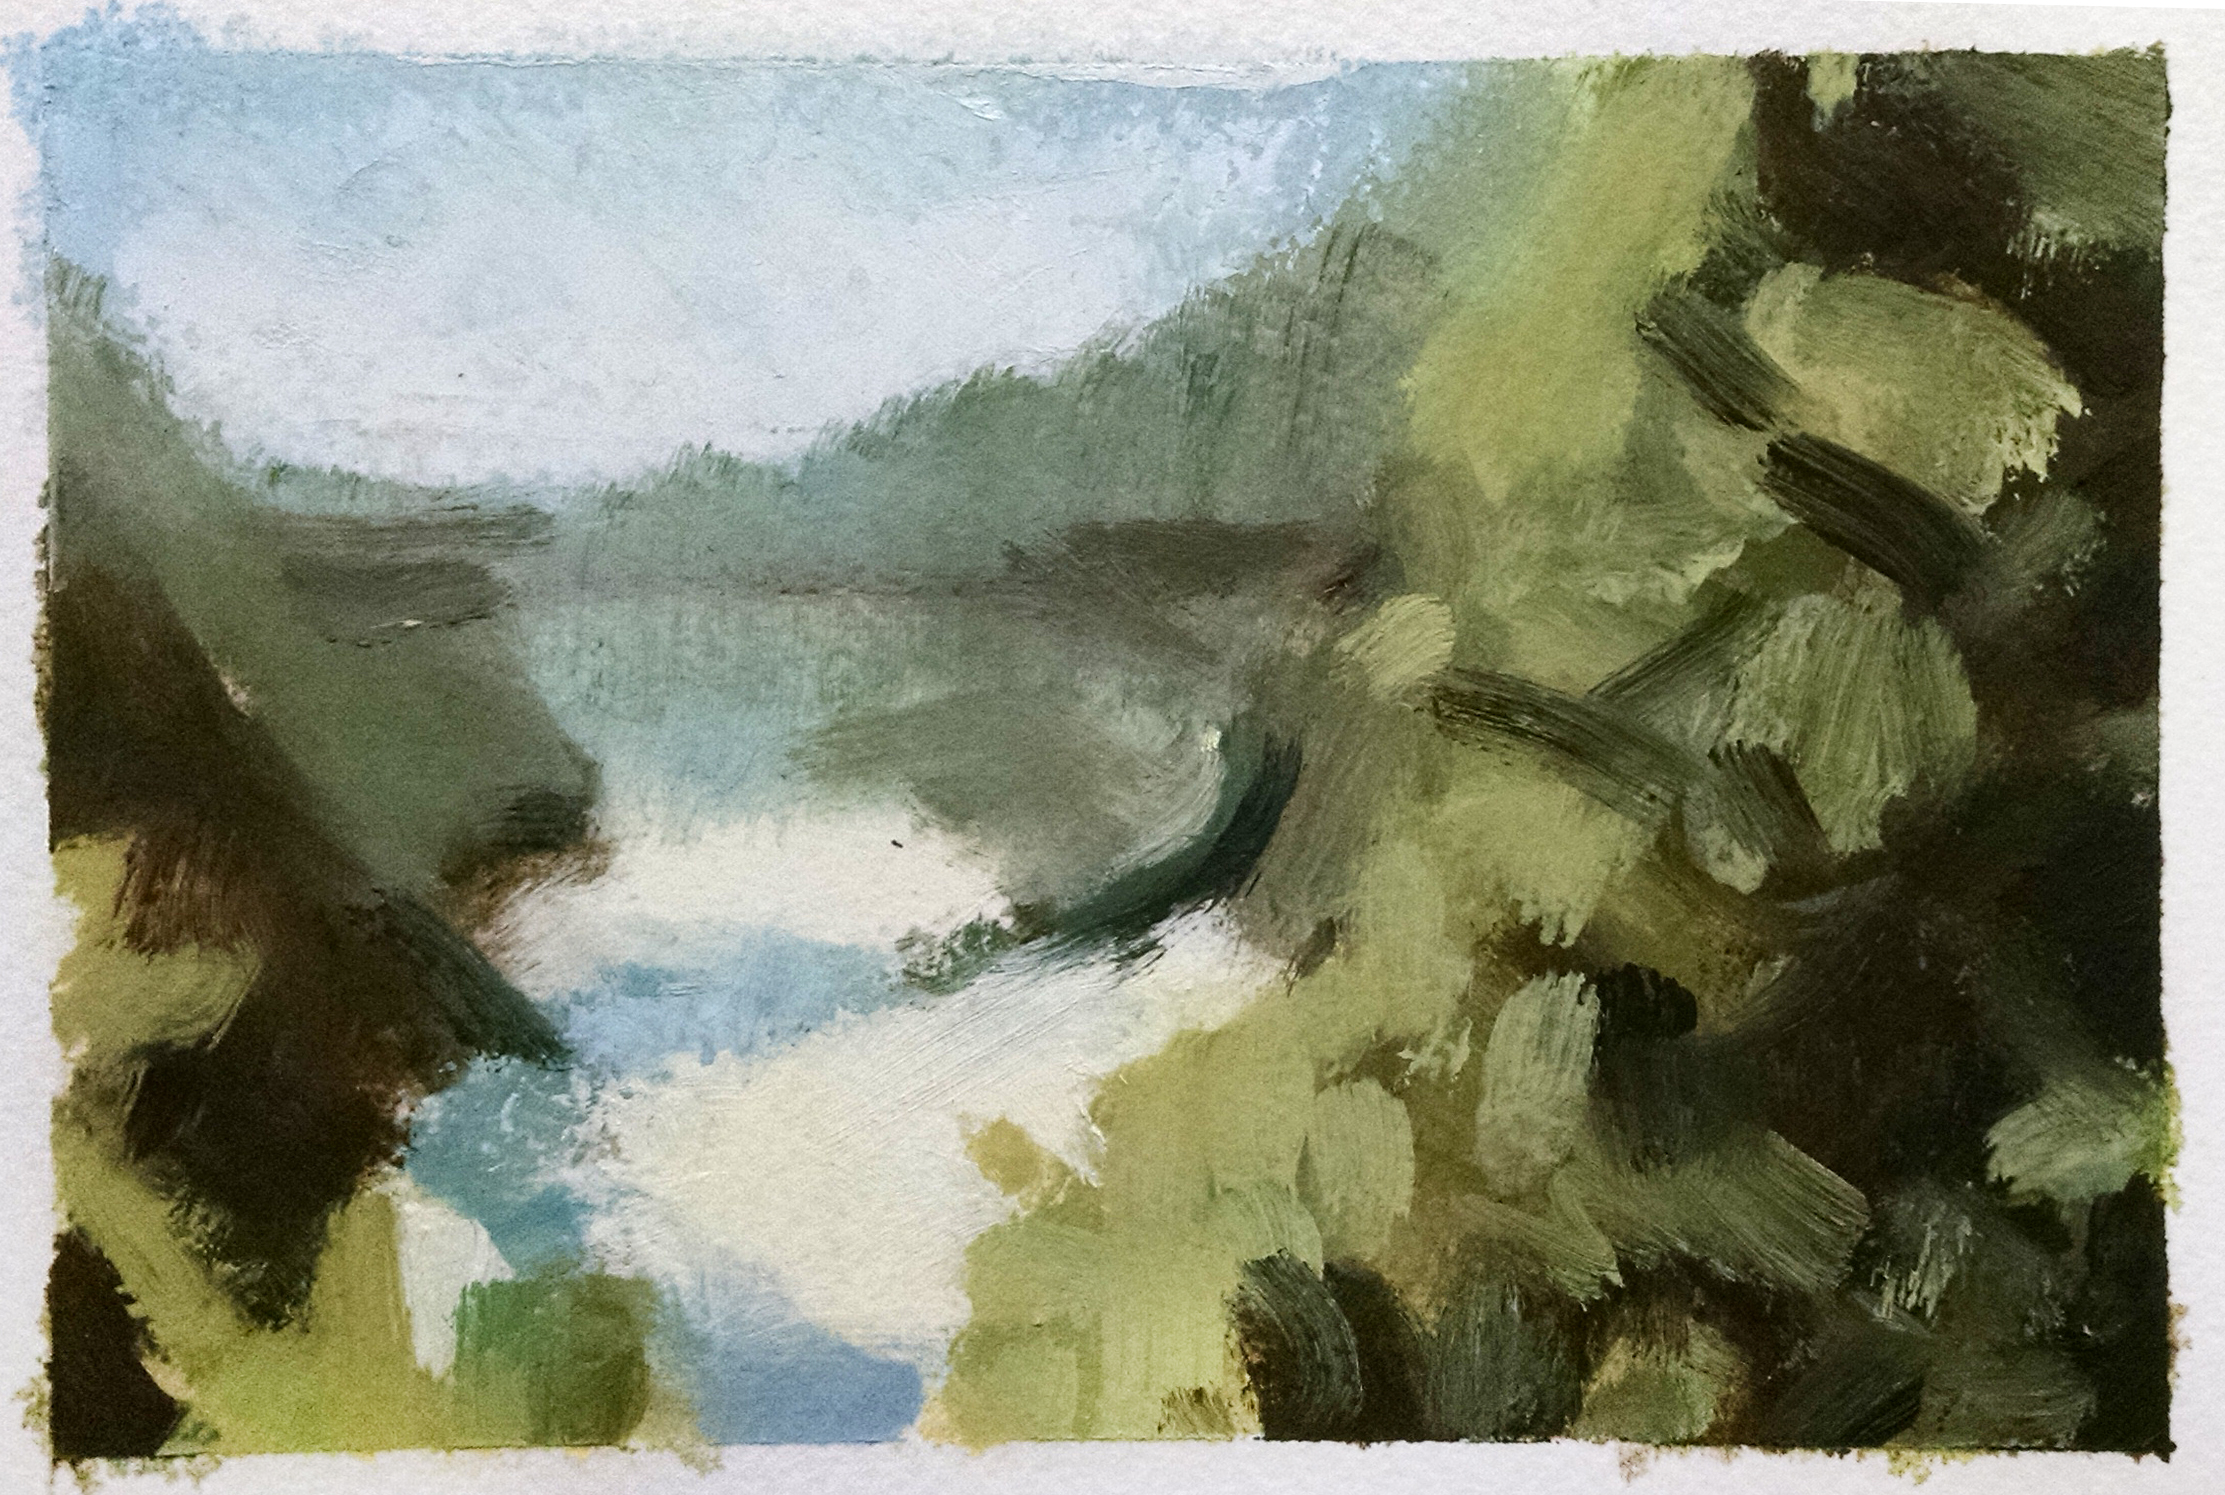   Yuba River , 4 x 6 in.  Oil on paper. Available for purchase. (2015) 